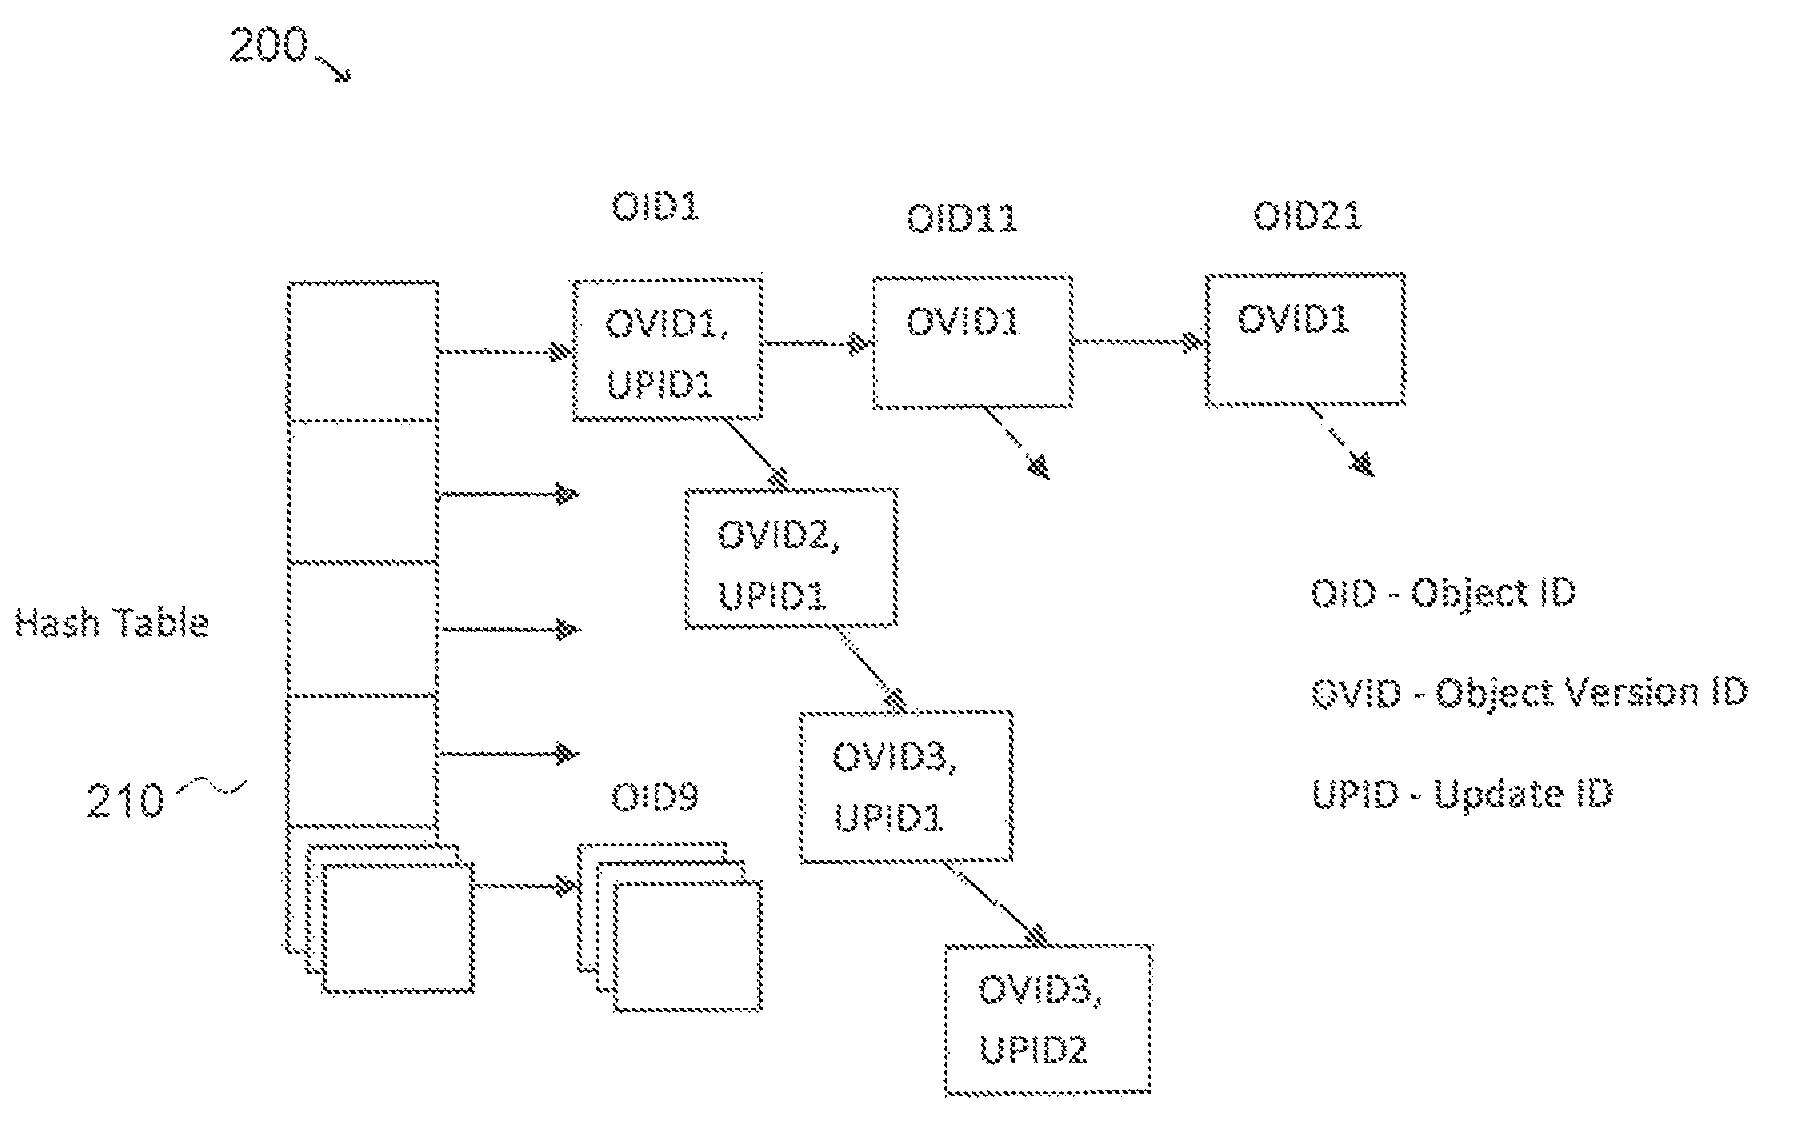 Snapshot isolation support for distributed query processing in a shared disk database cluster